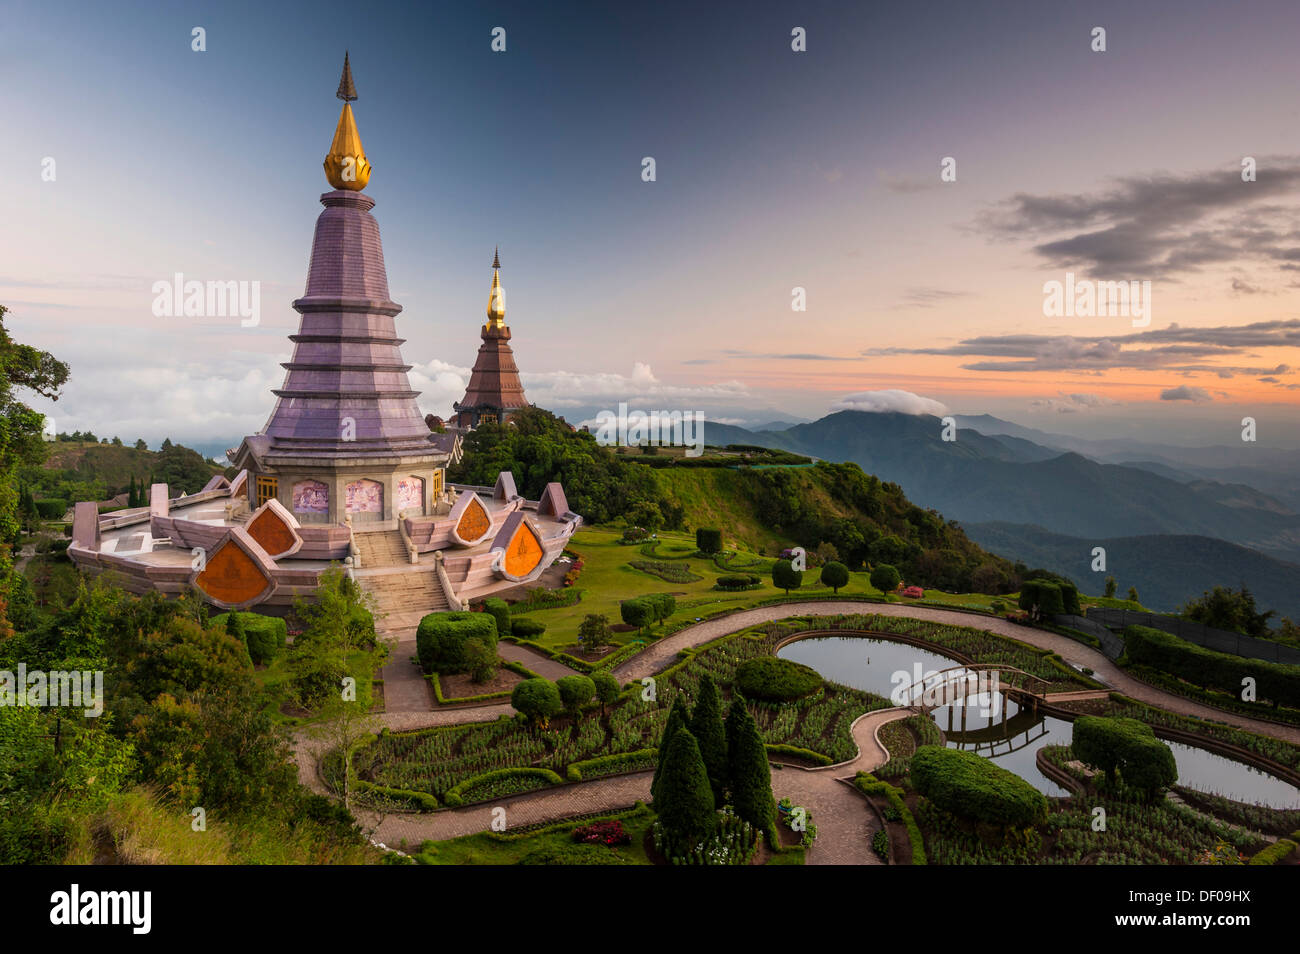 Phra Mahathat Naphamethinidon temple complex, Chedi of the Queen and Chedi of the King, Doi Inthanon National Park Stock Photo